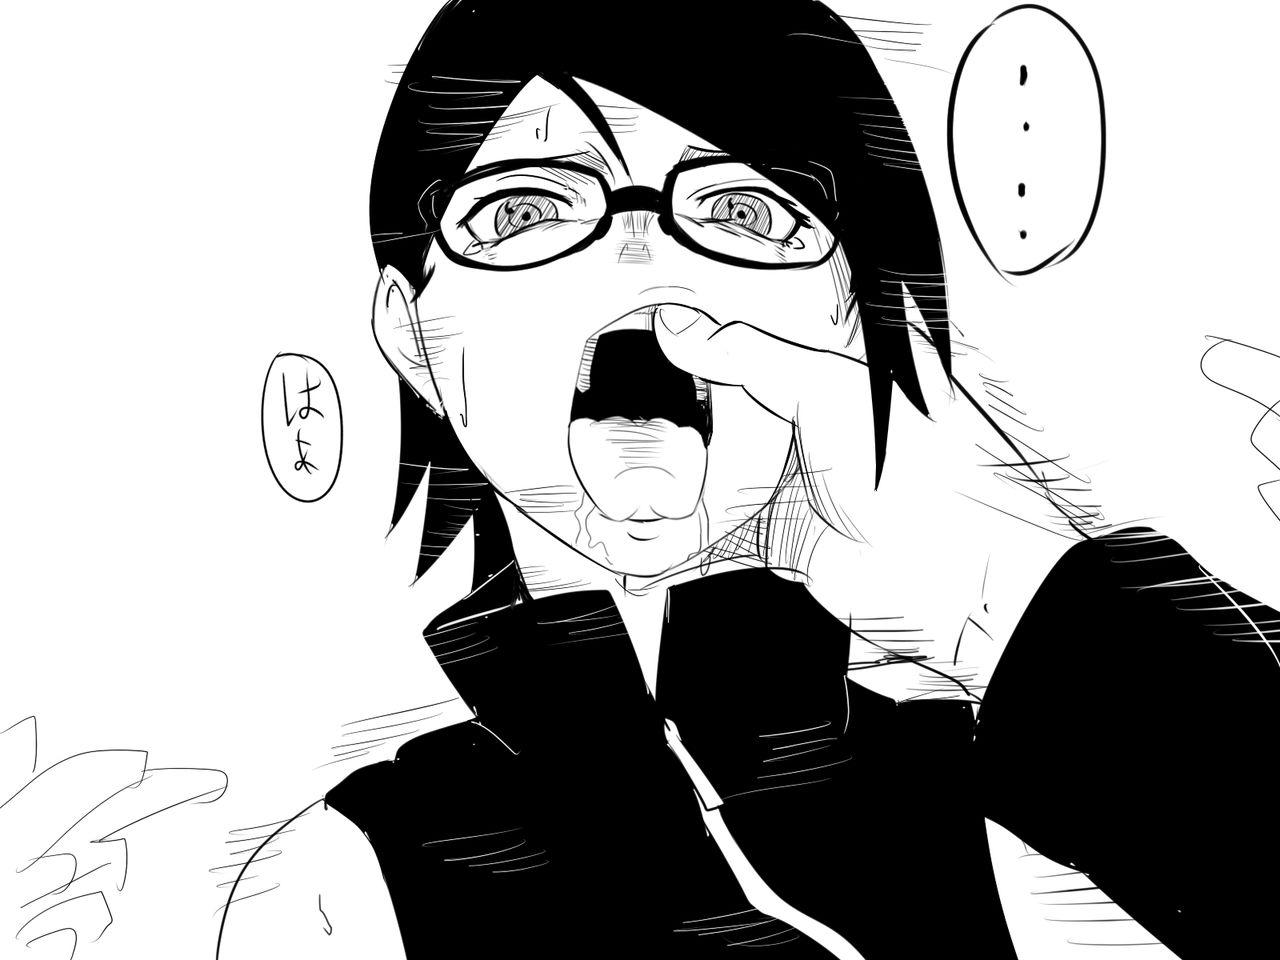 Sex Massage NARUTO  【Personal exercise】Continuous updating - Naruto Boruto Pussysex - Page 9